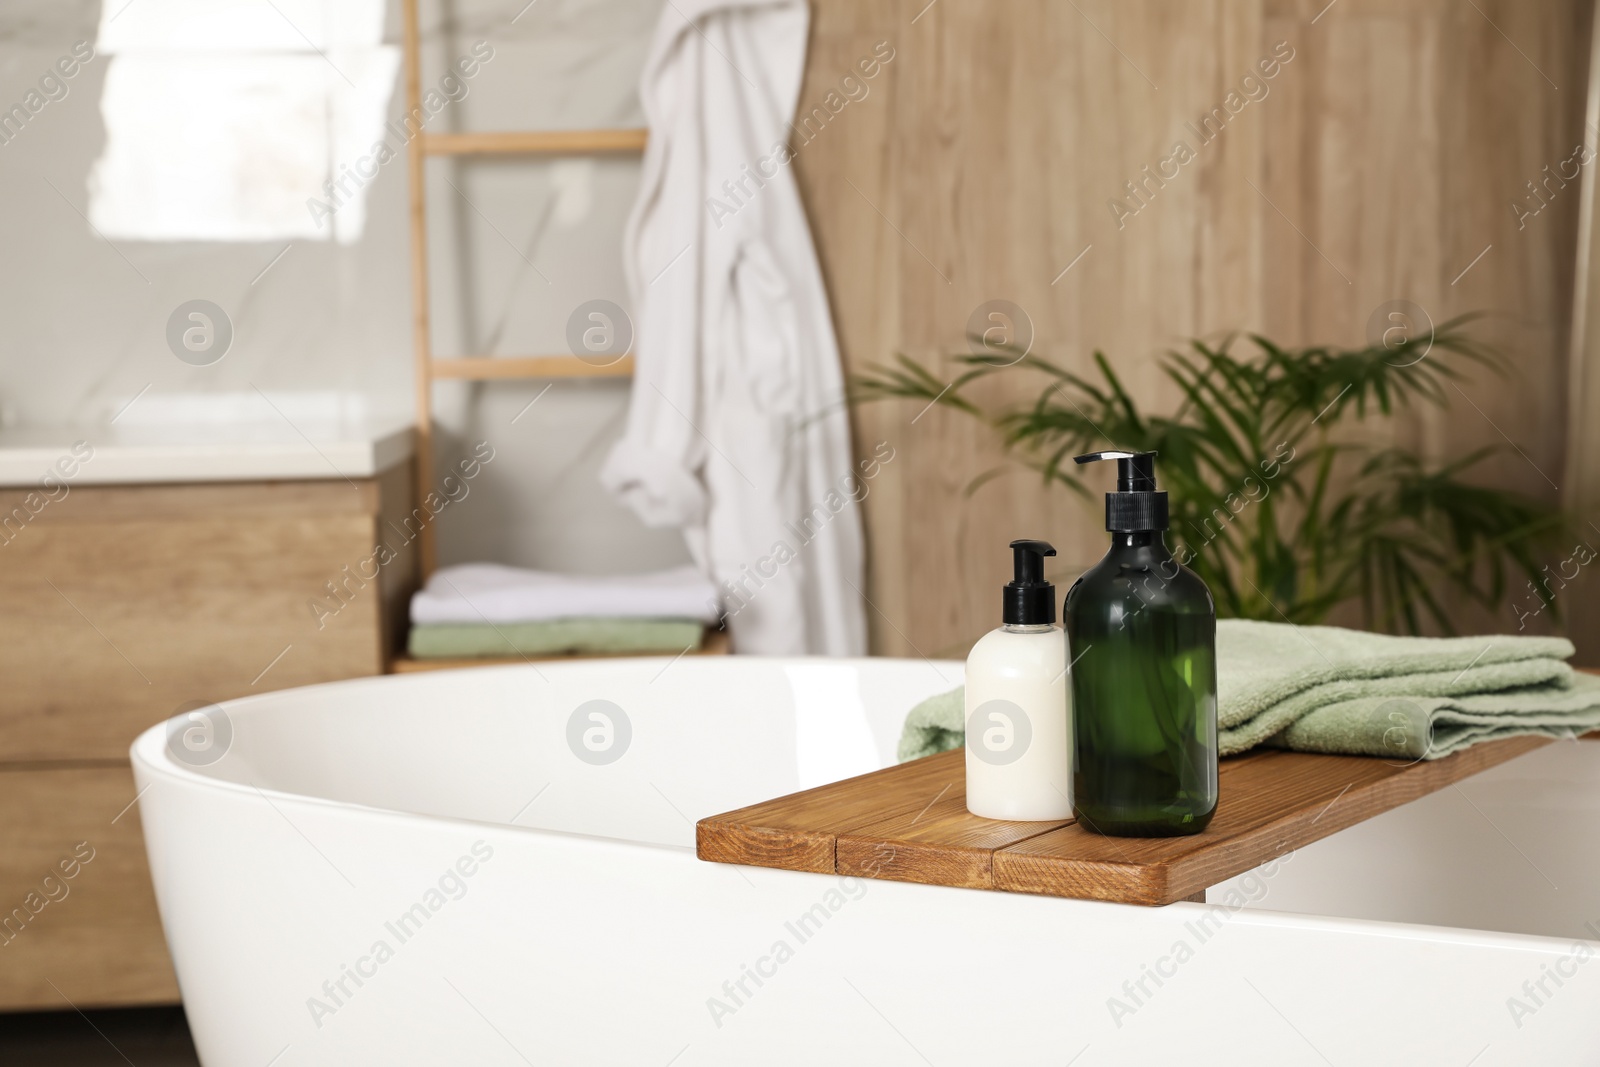 Photo of Wooden bath tray with bottles of shower gels and towel on tub indoors, space for text